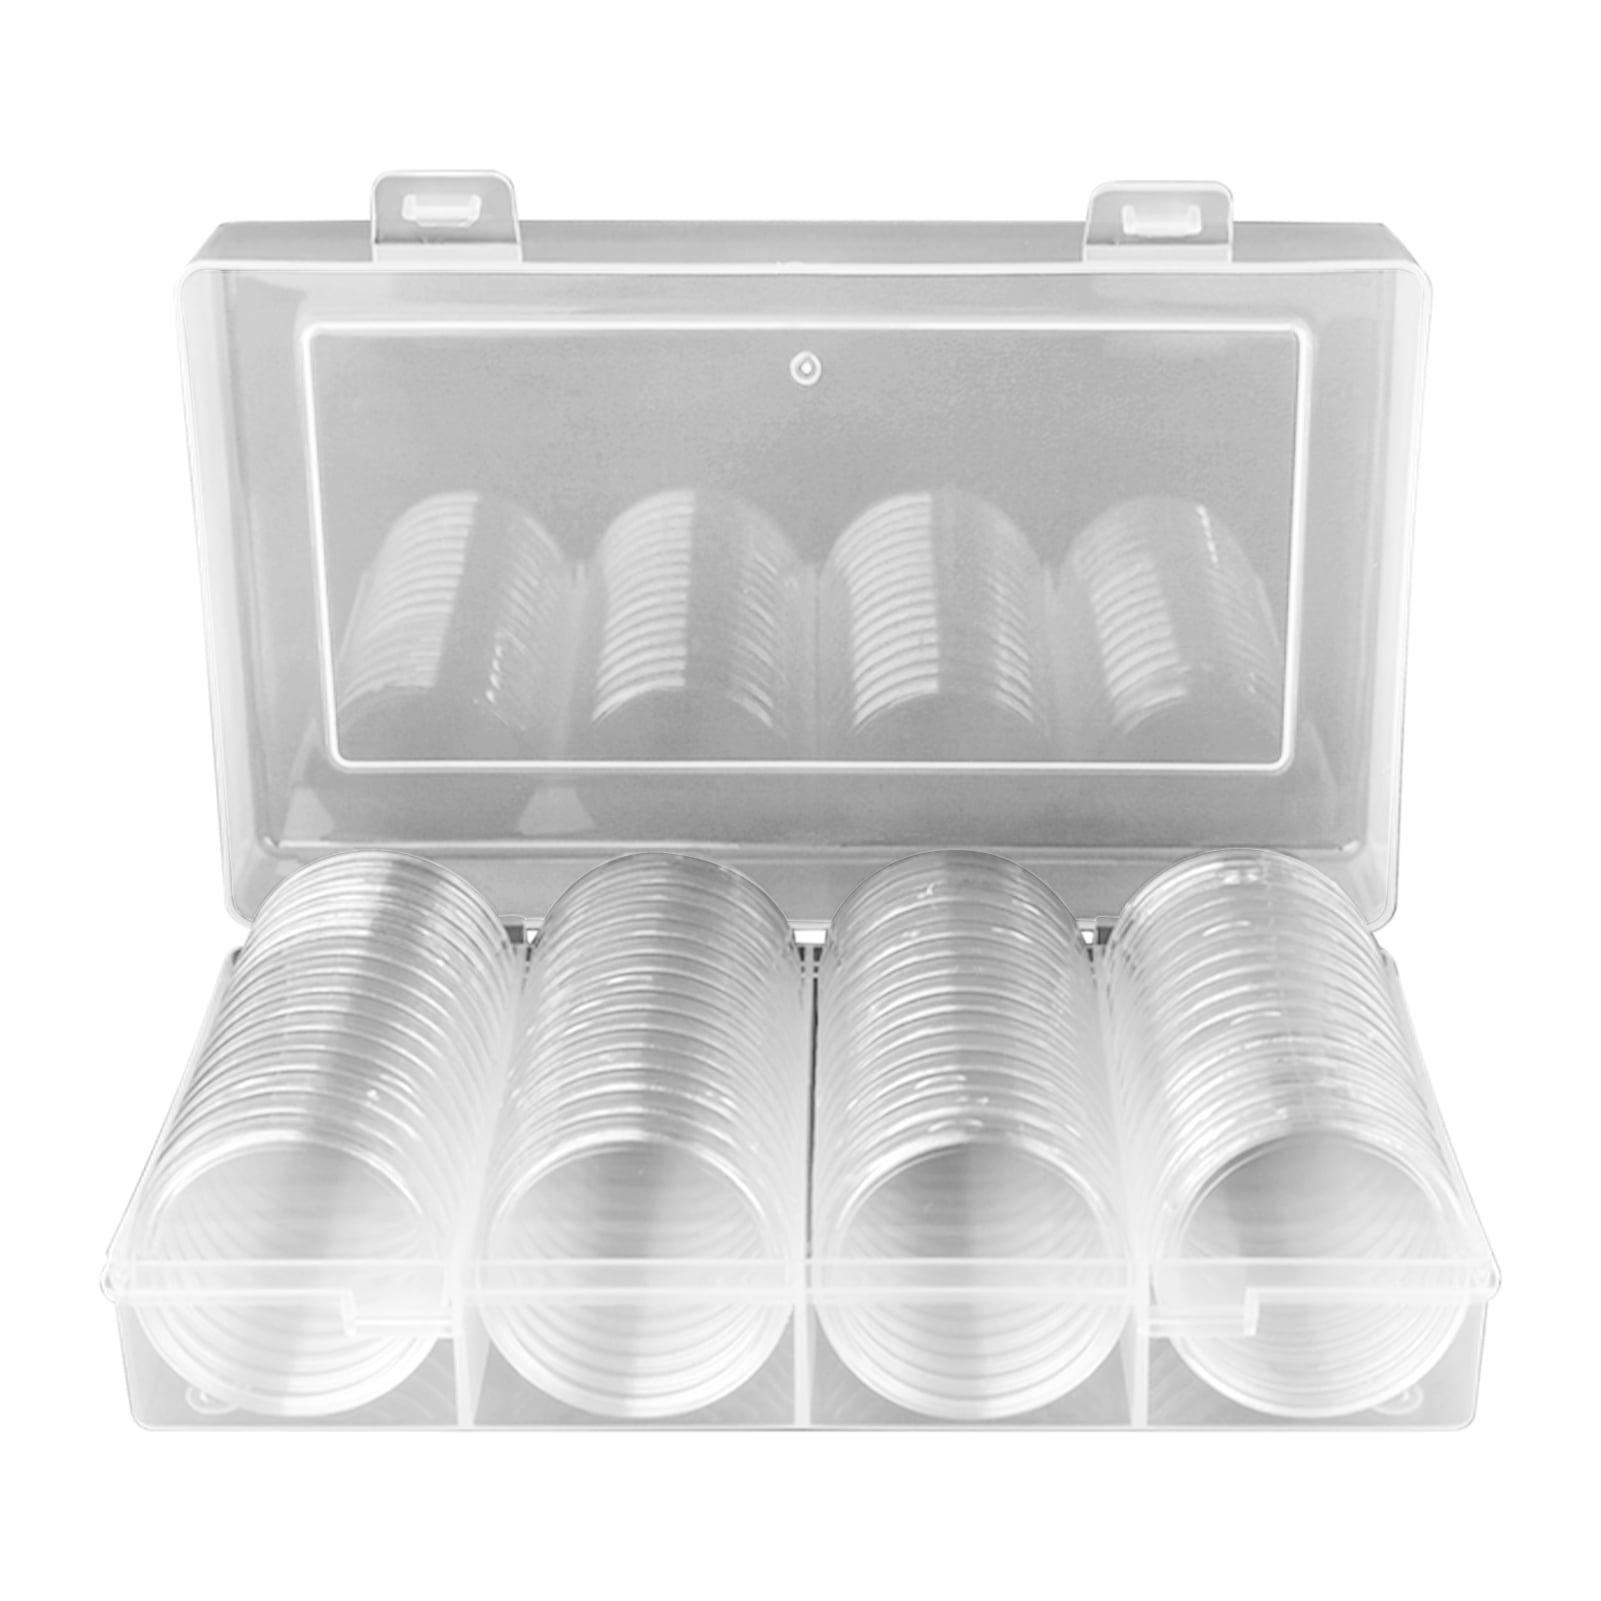 100pcs Clear Coin Capsules Coin Storage Boxes Container Display Case 15 Sizes 